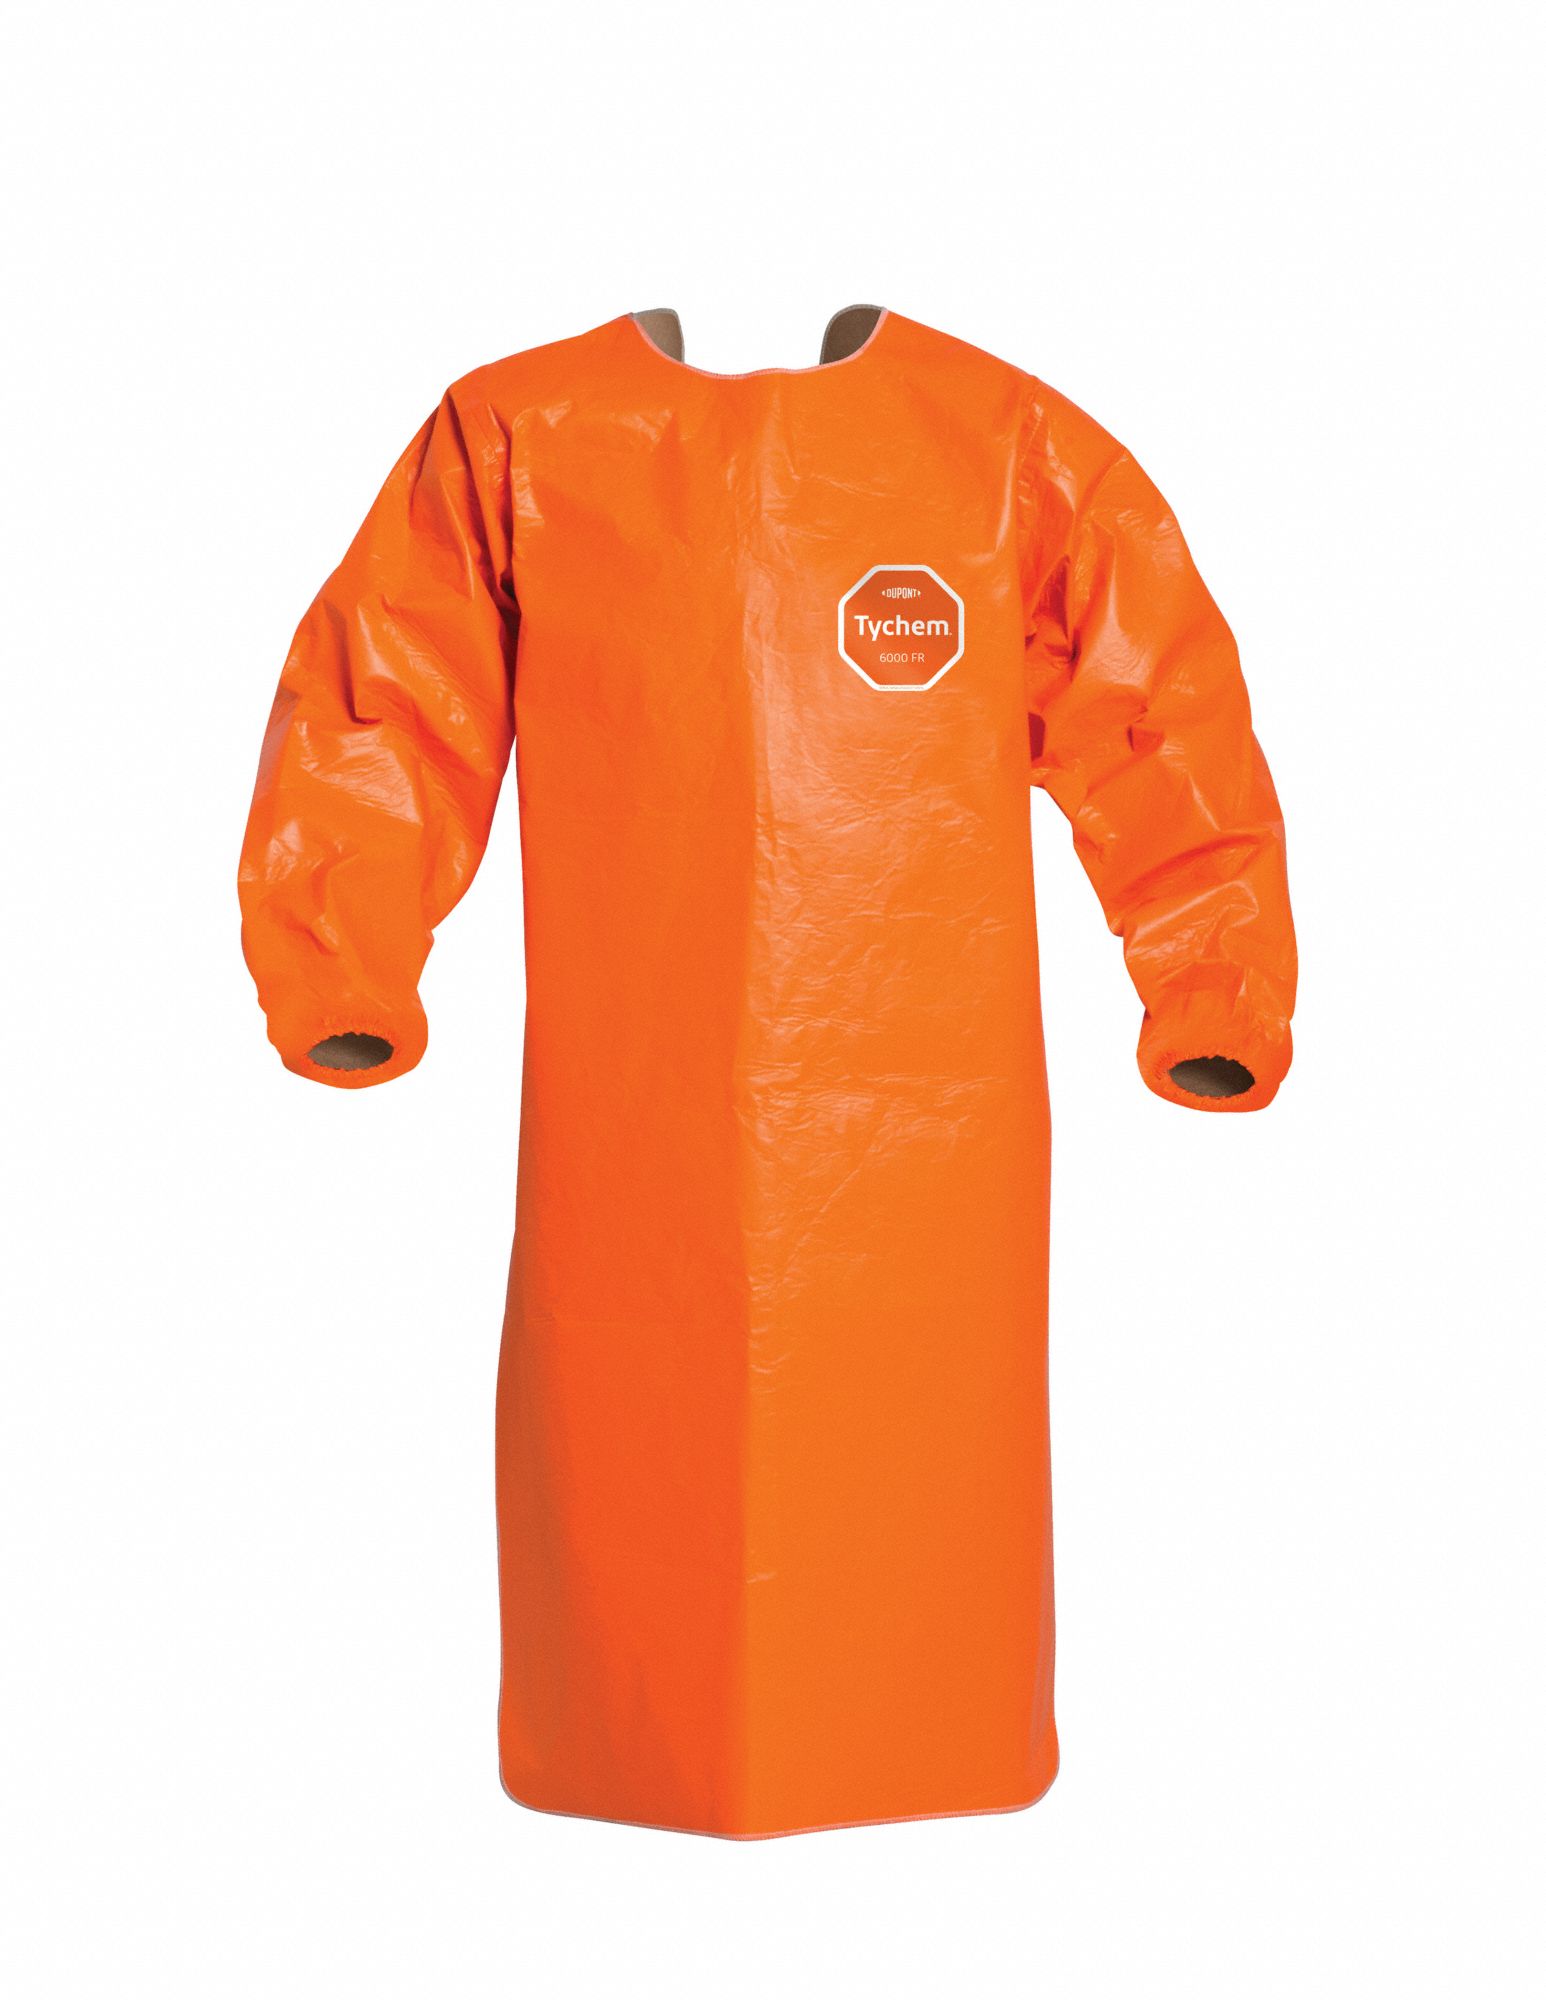 The fabrics and anti-heat protections manufactured by Apronor